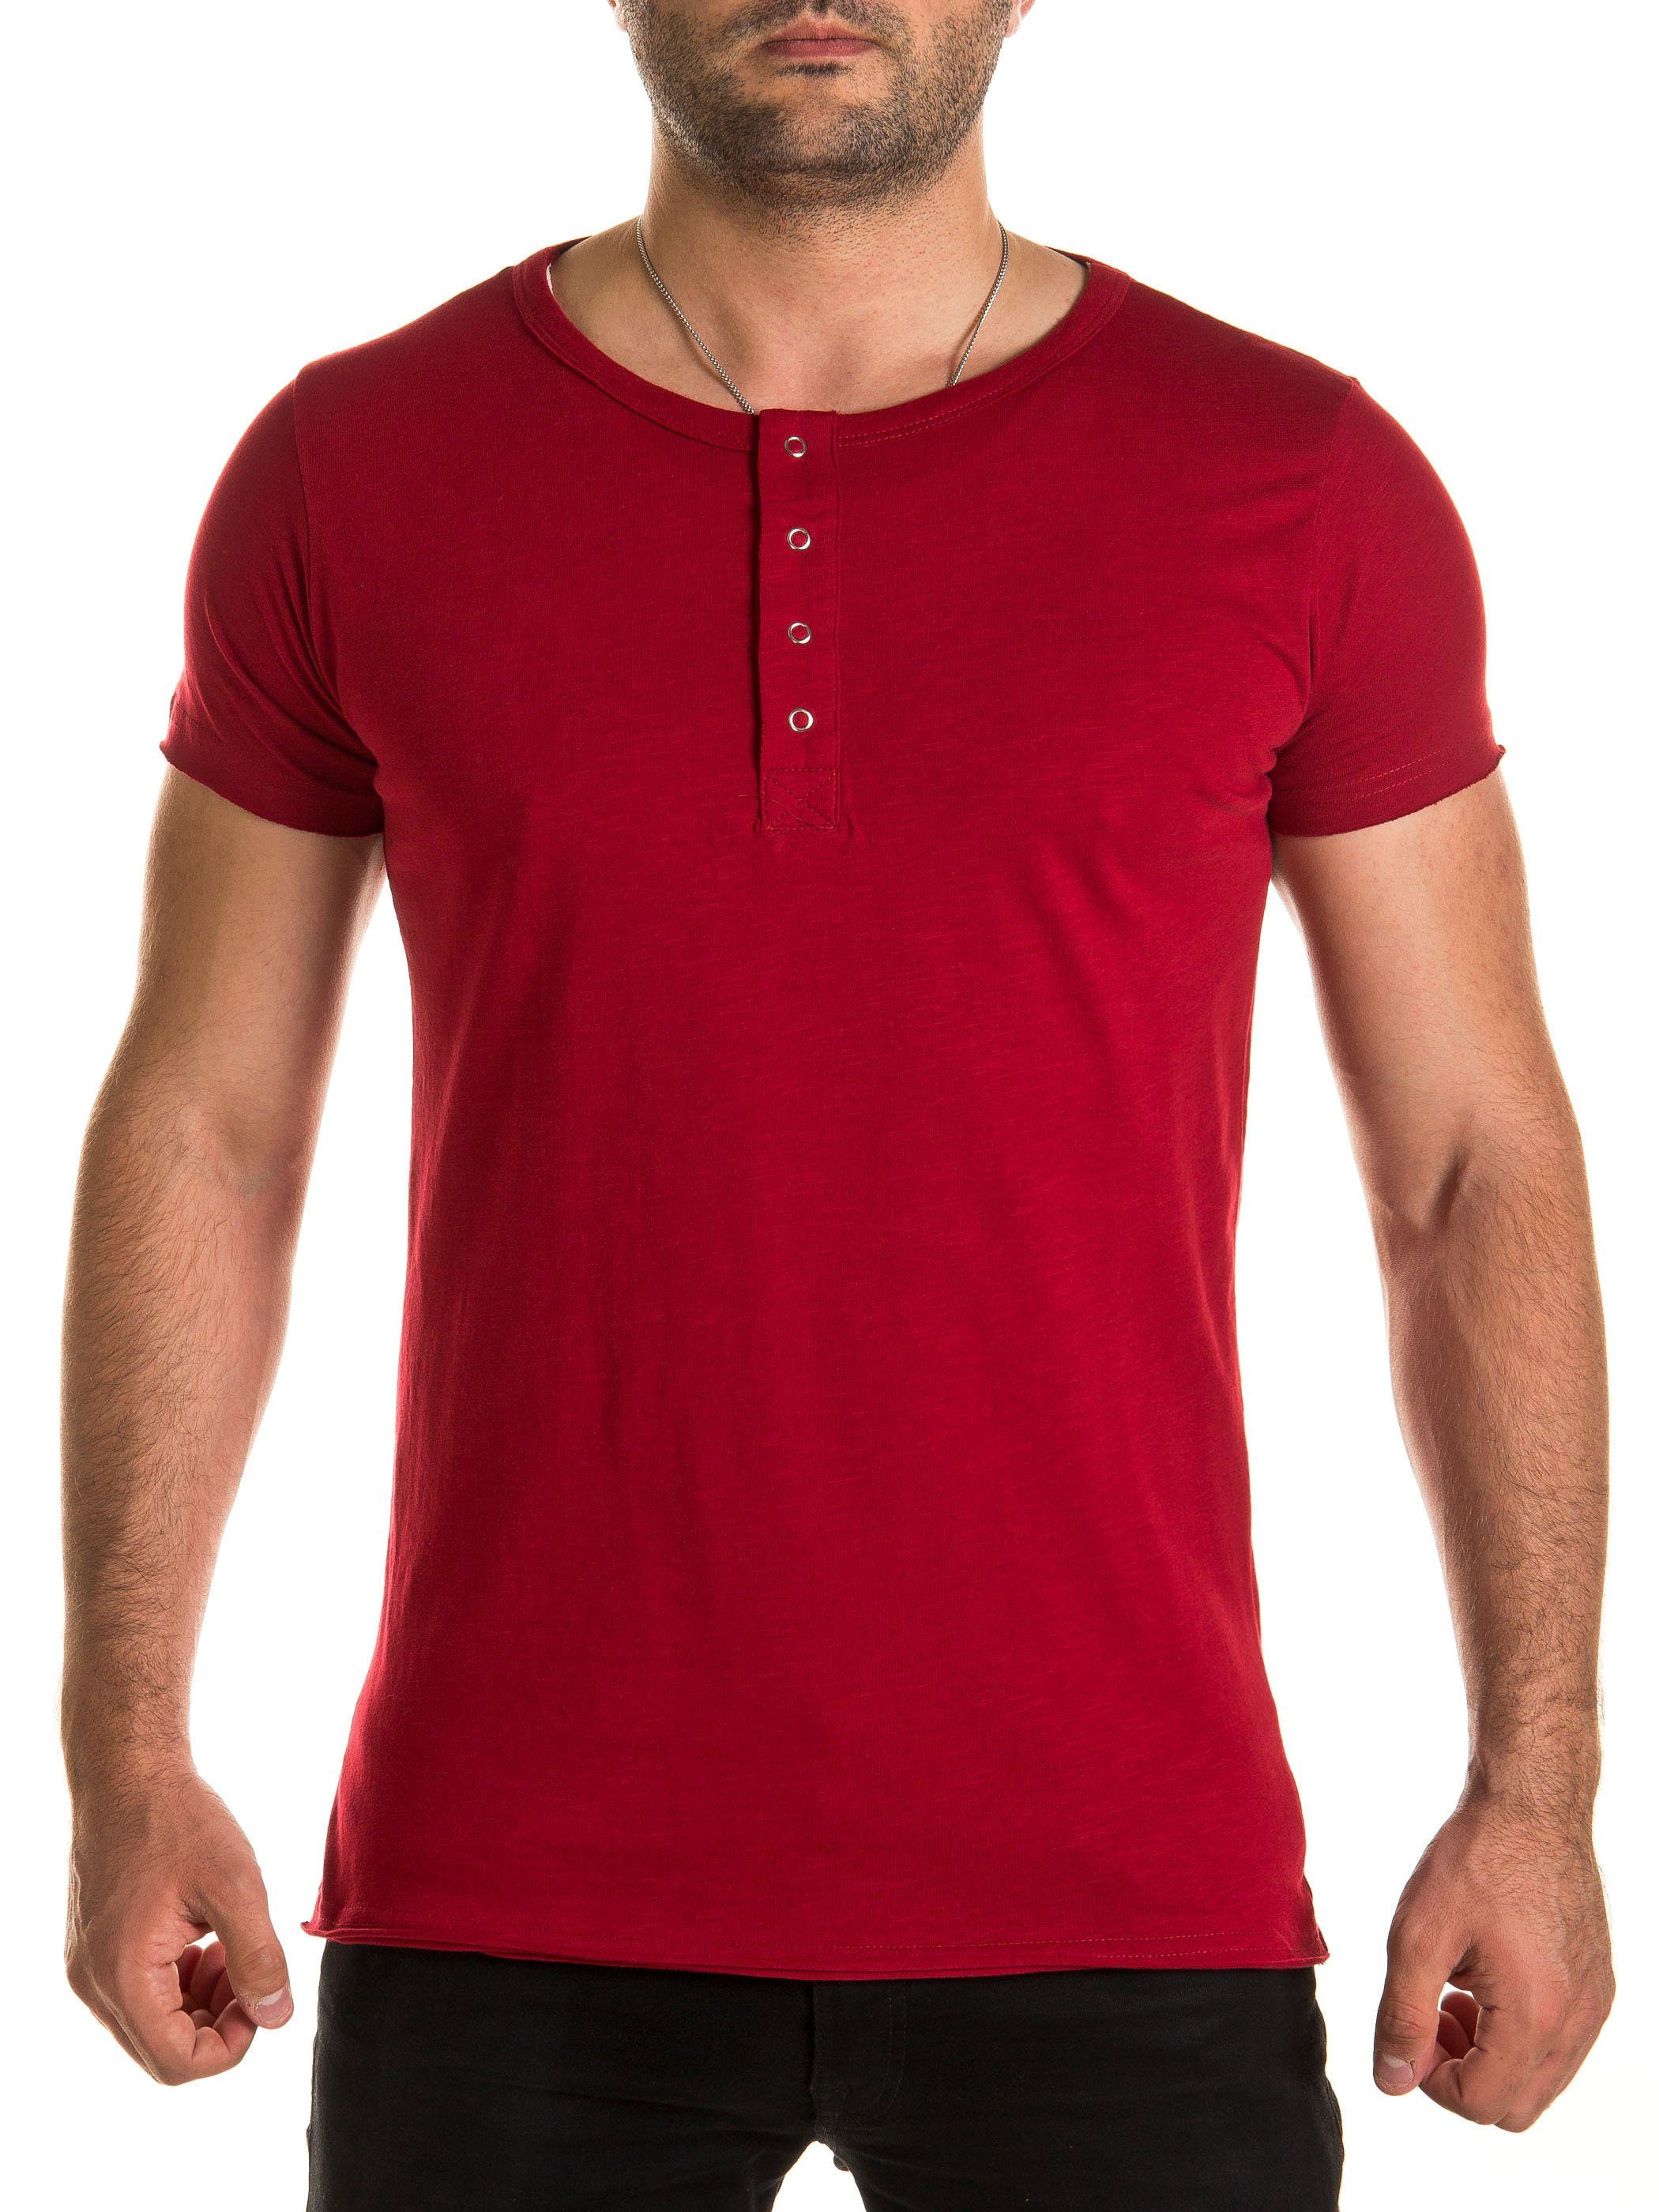 WOTEGA T-Shirt V-Neck Double Layer T-Shirt Pete (Packung) V-Neck Double Layer T-Shirt Pete Rot (biking red 190511)